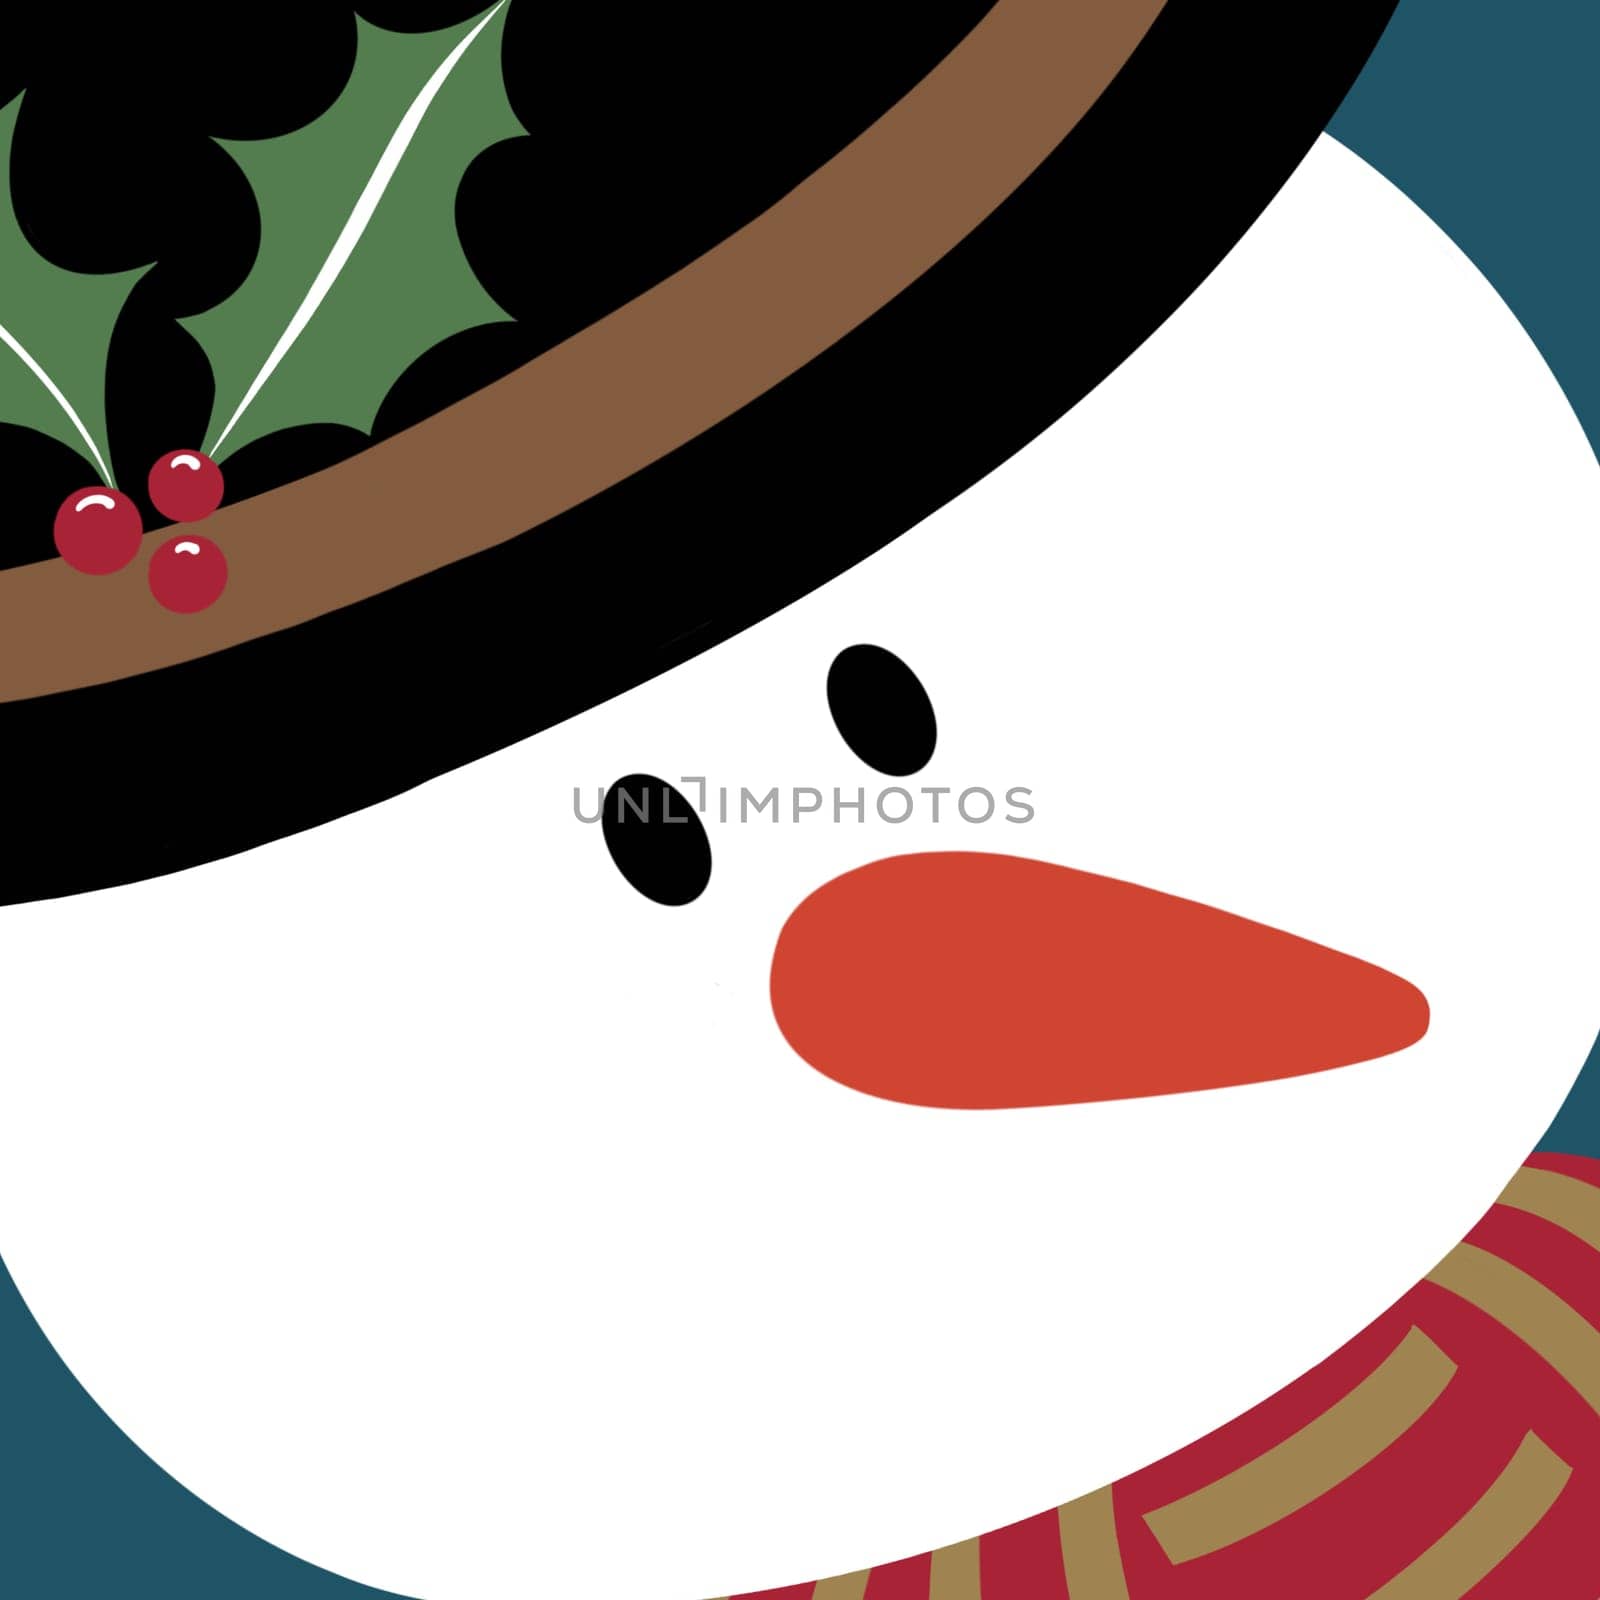 Close up view of a cartoon snowman illustration on a cold winter day.  The snow man is wearing a hat decorated with holly leaves and a striped scarf with hearts motifs and tassels. He has a the traditional carrot for his nose. Fun in the snow at Christmas.